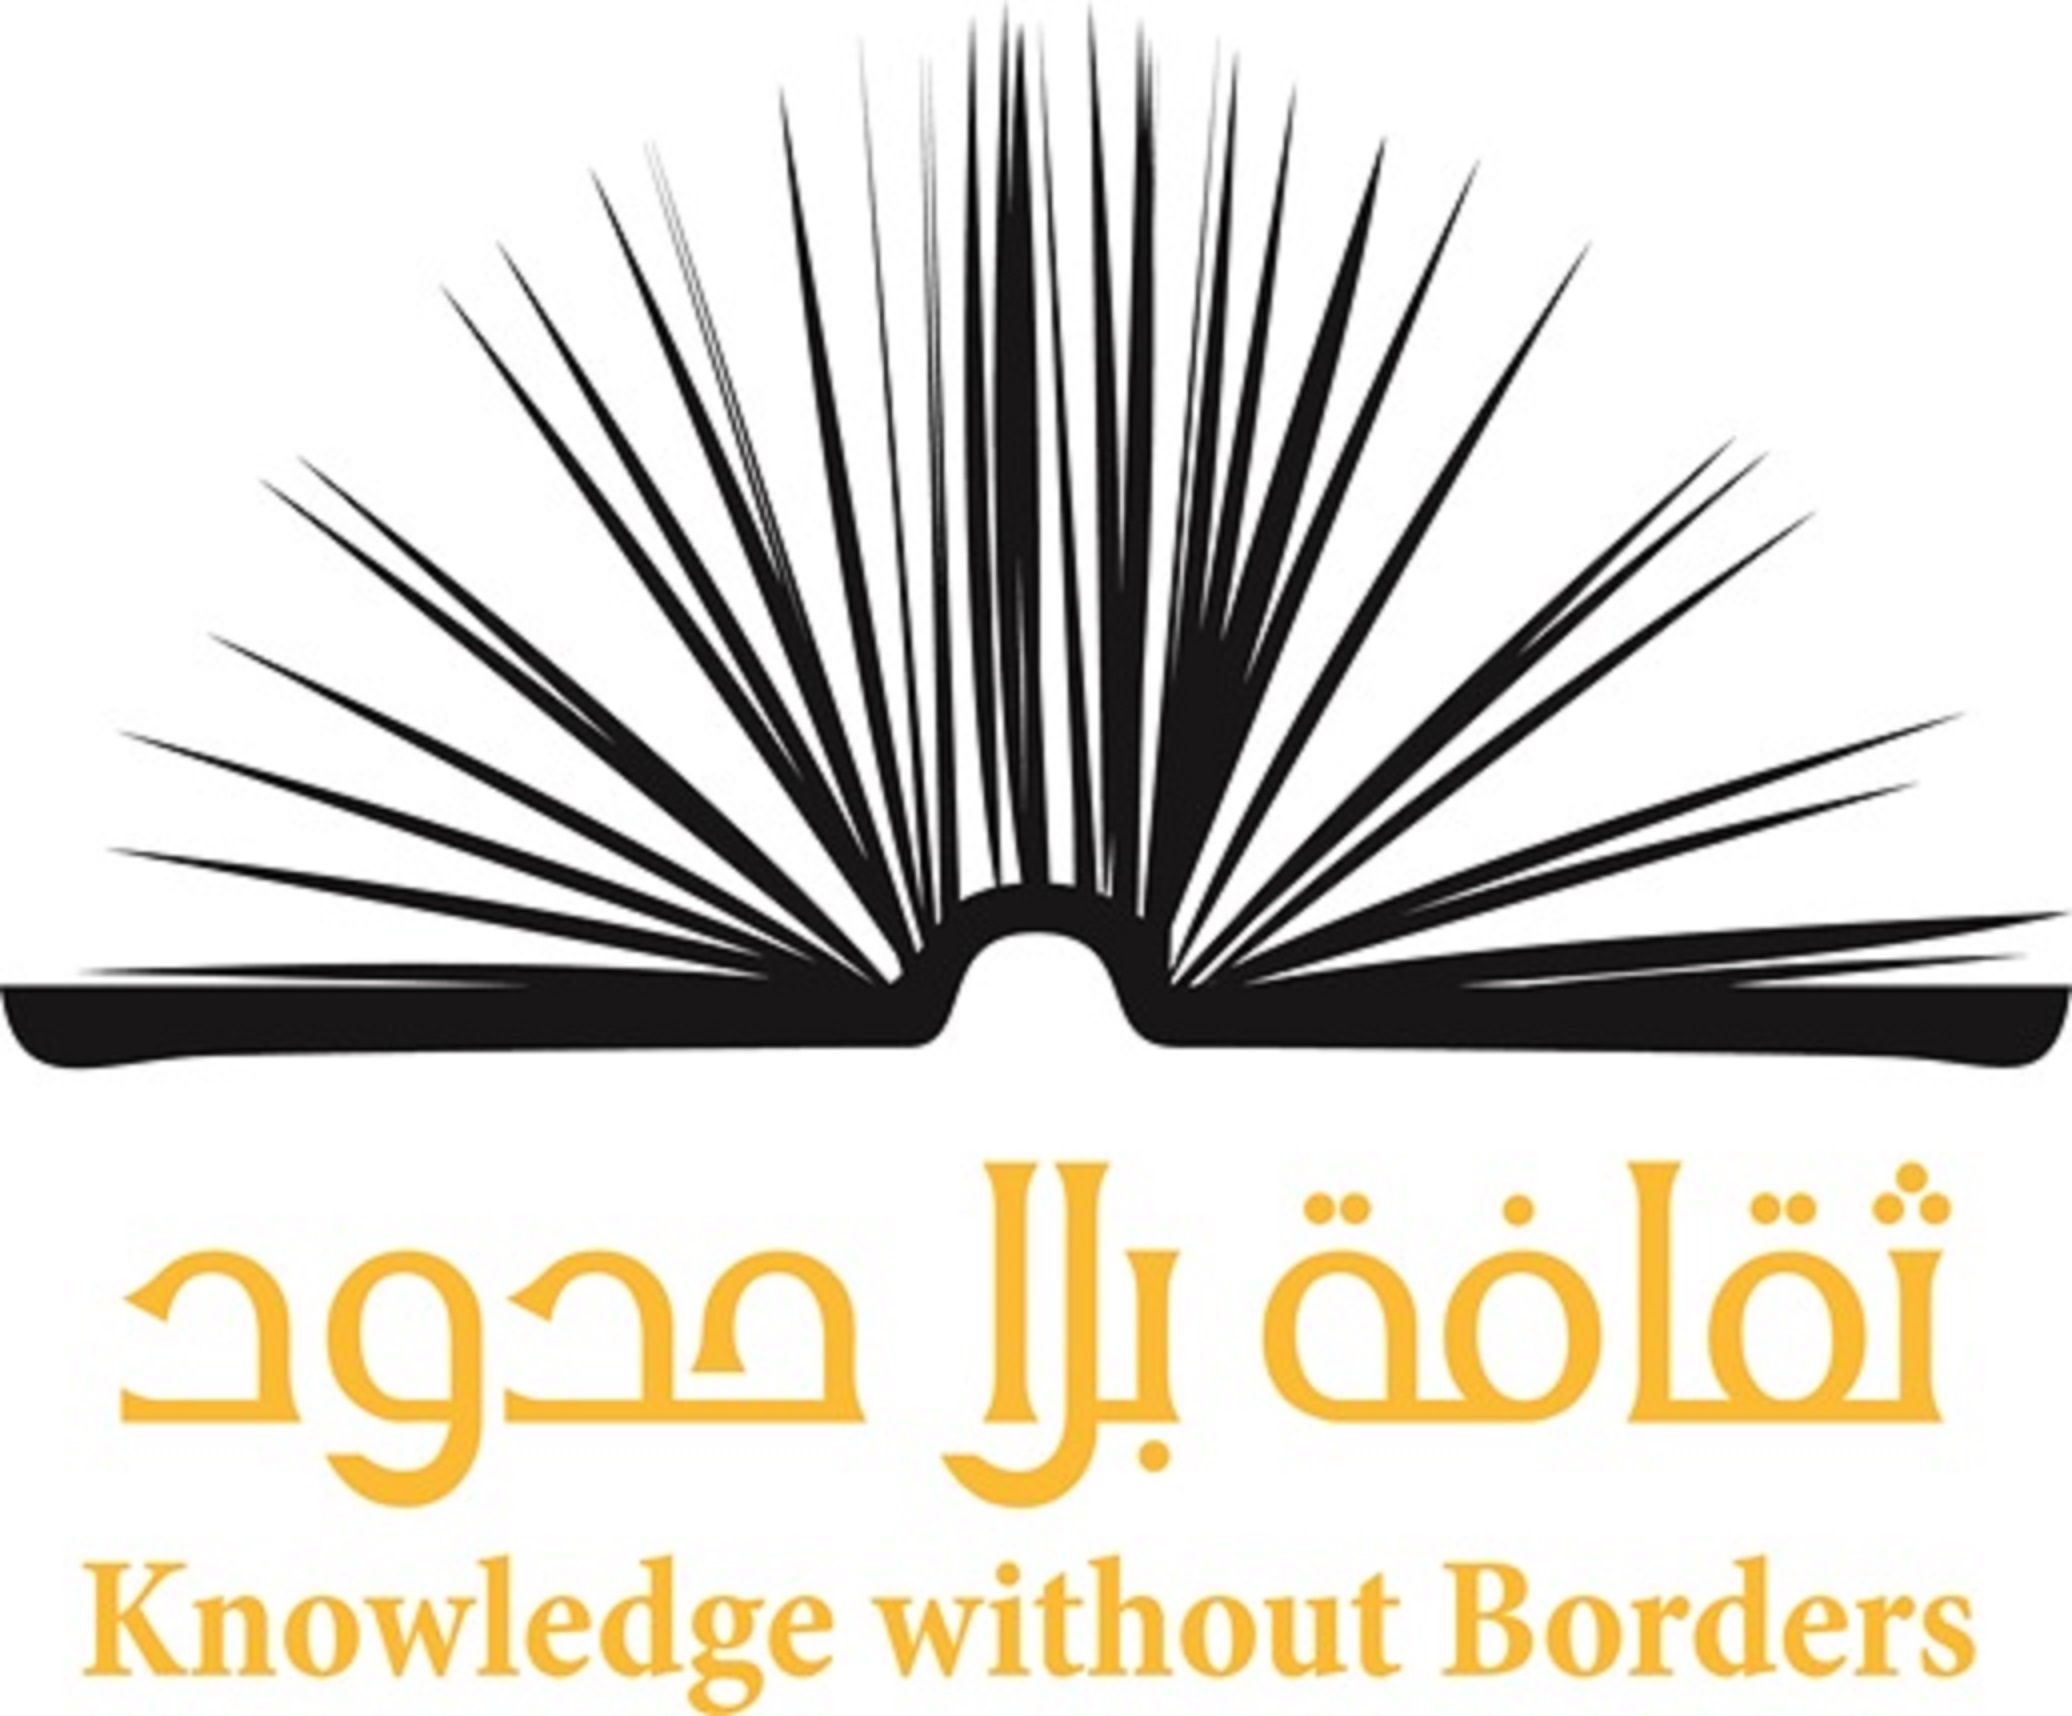 Knowledge_without_Borders_attends_London_conference_with_world_experts